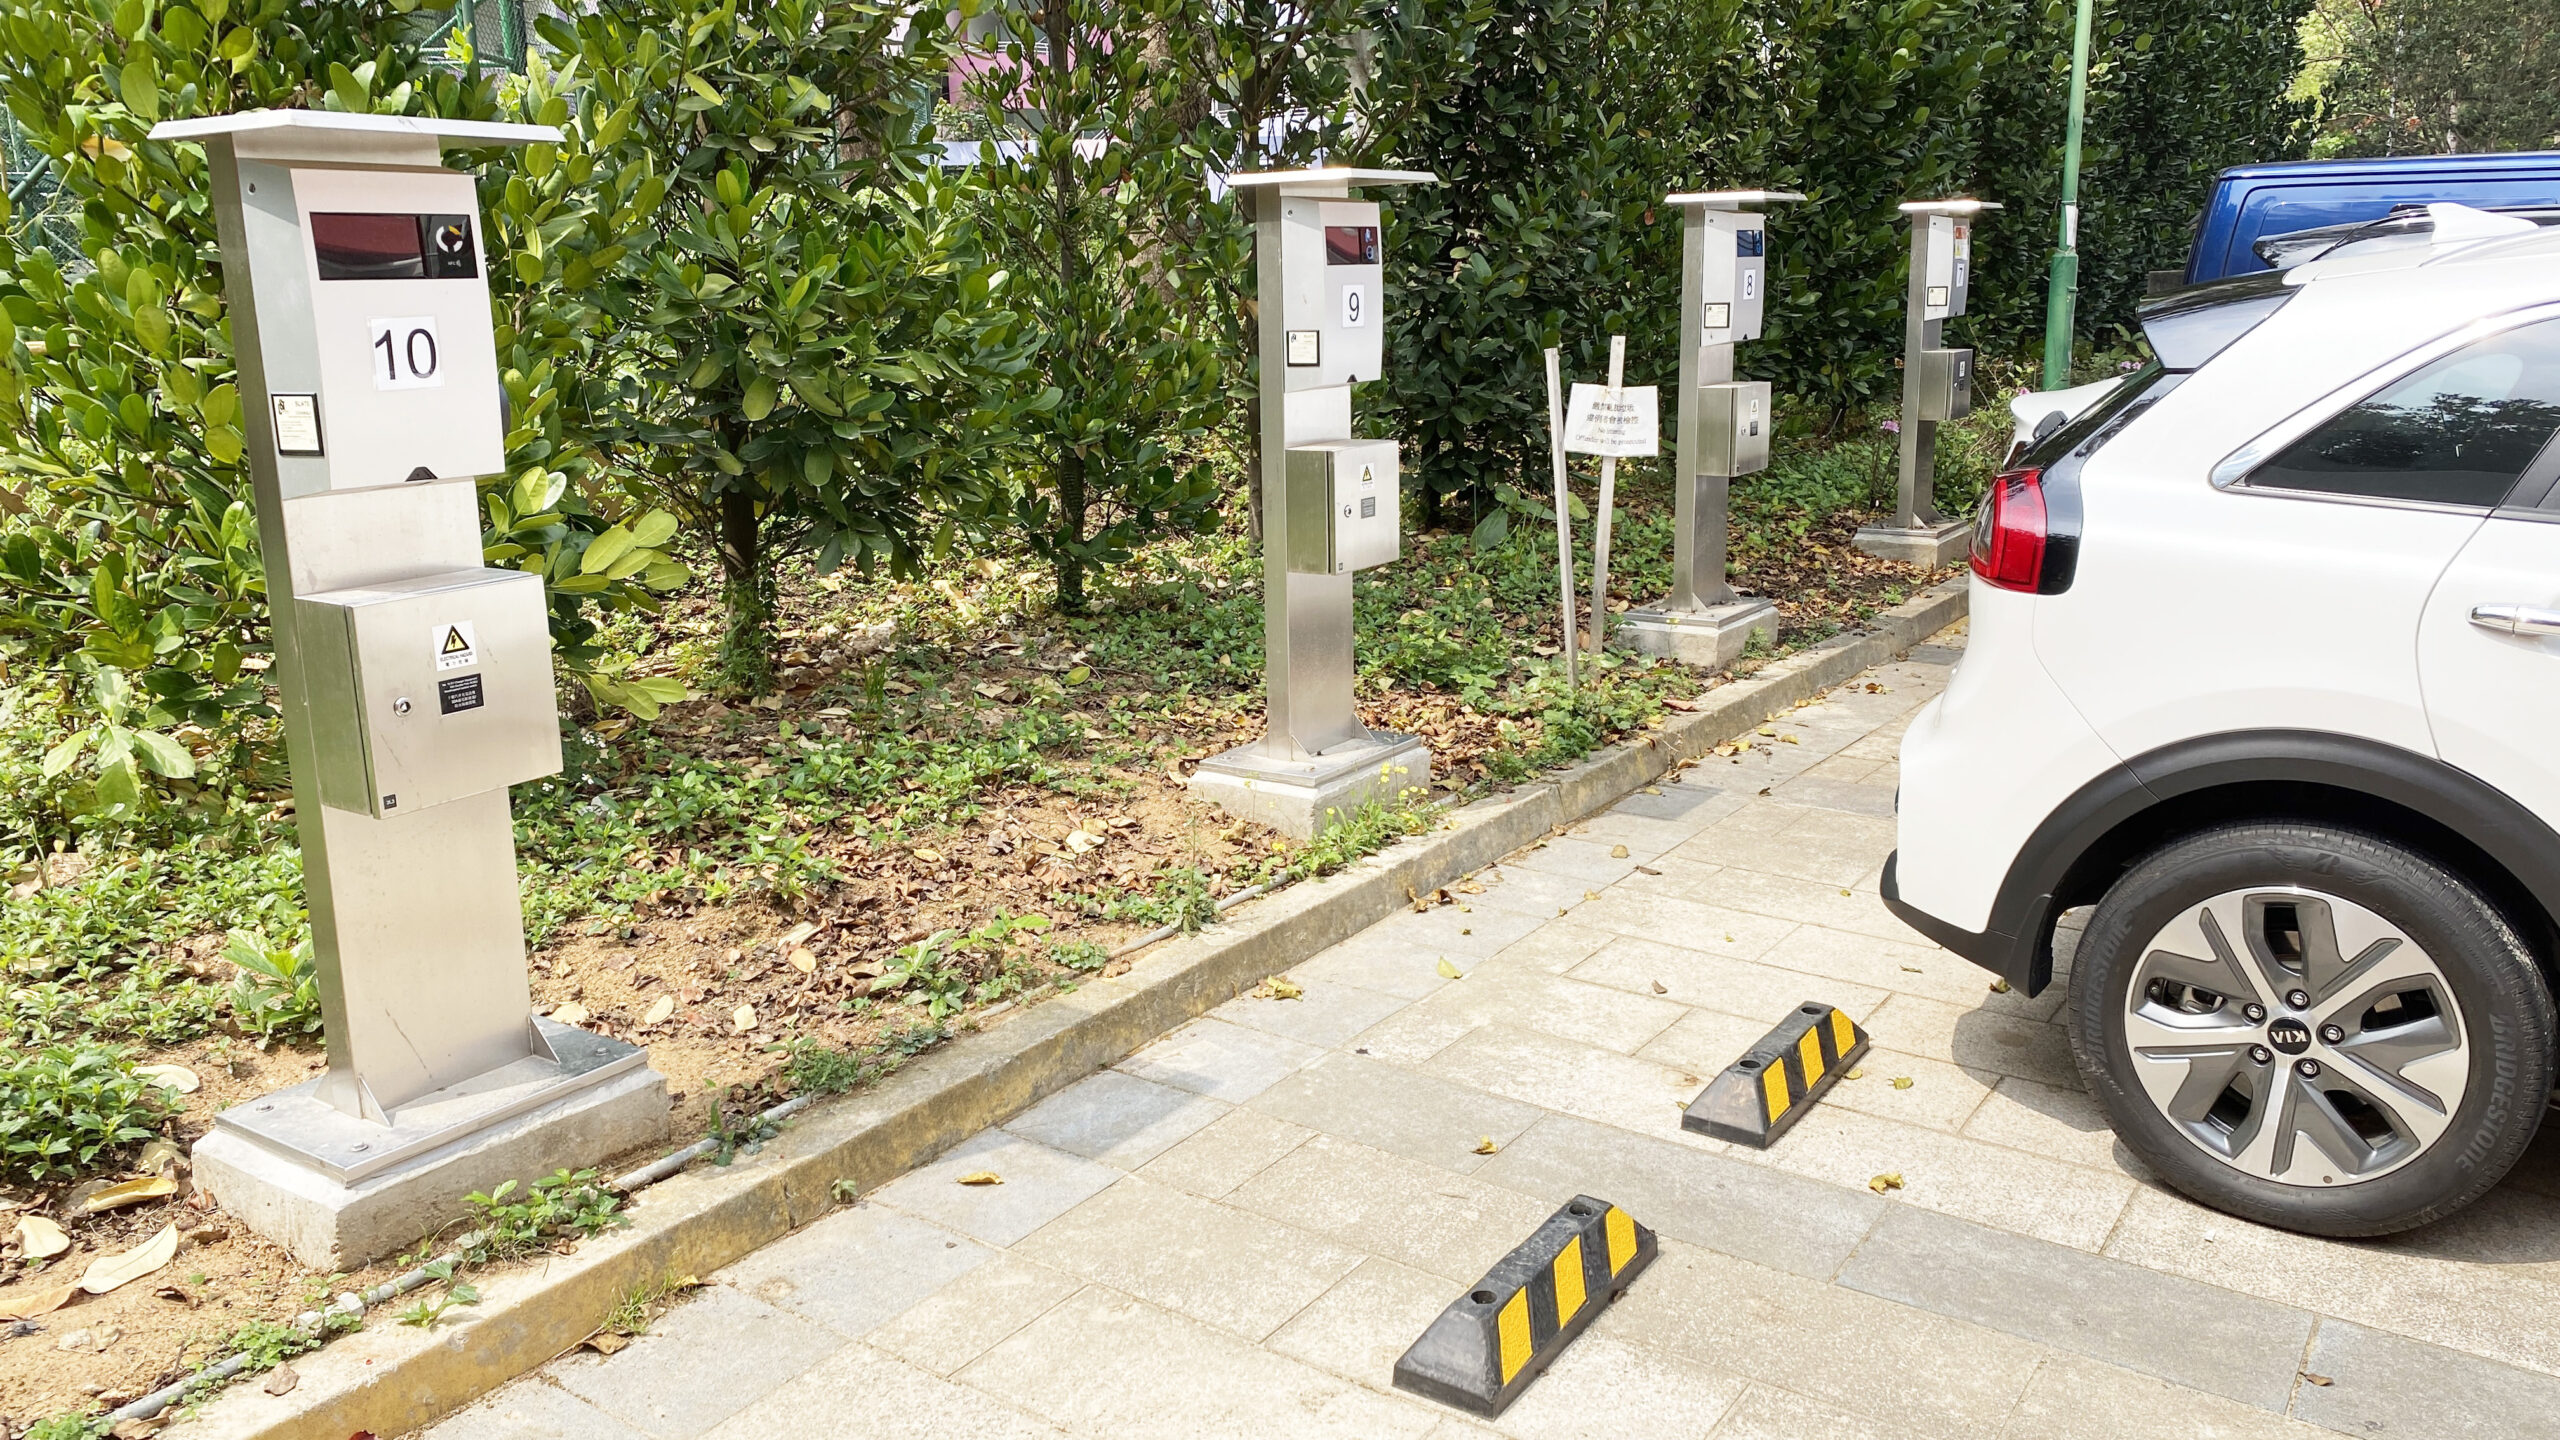 HK01 – Organisation sets up 400 additional charging points covering 4 major types of venues to work with government’s plan to increase local EV adoption